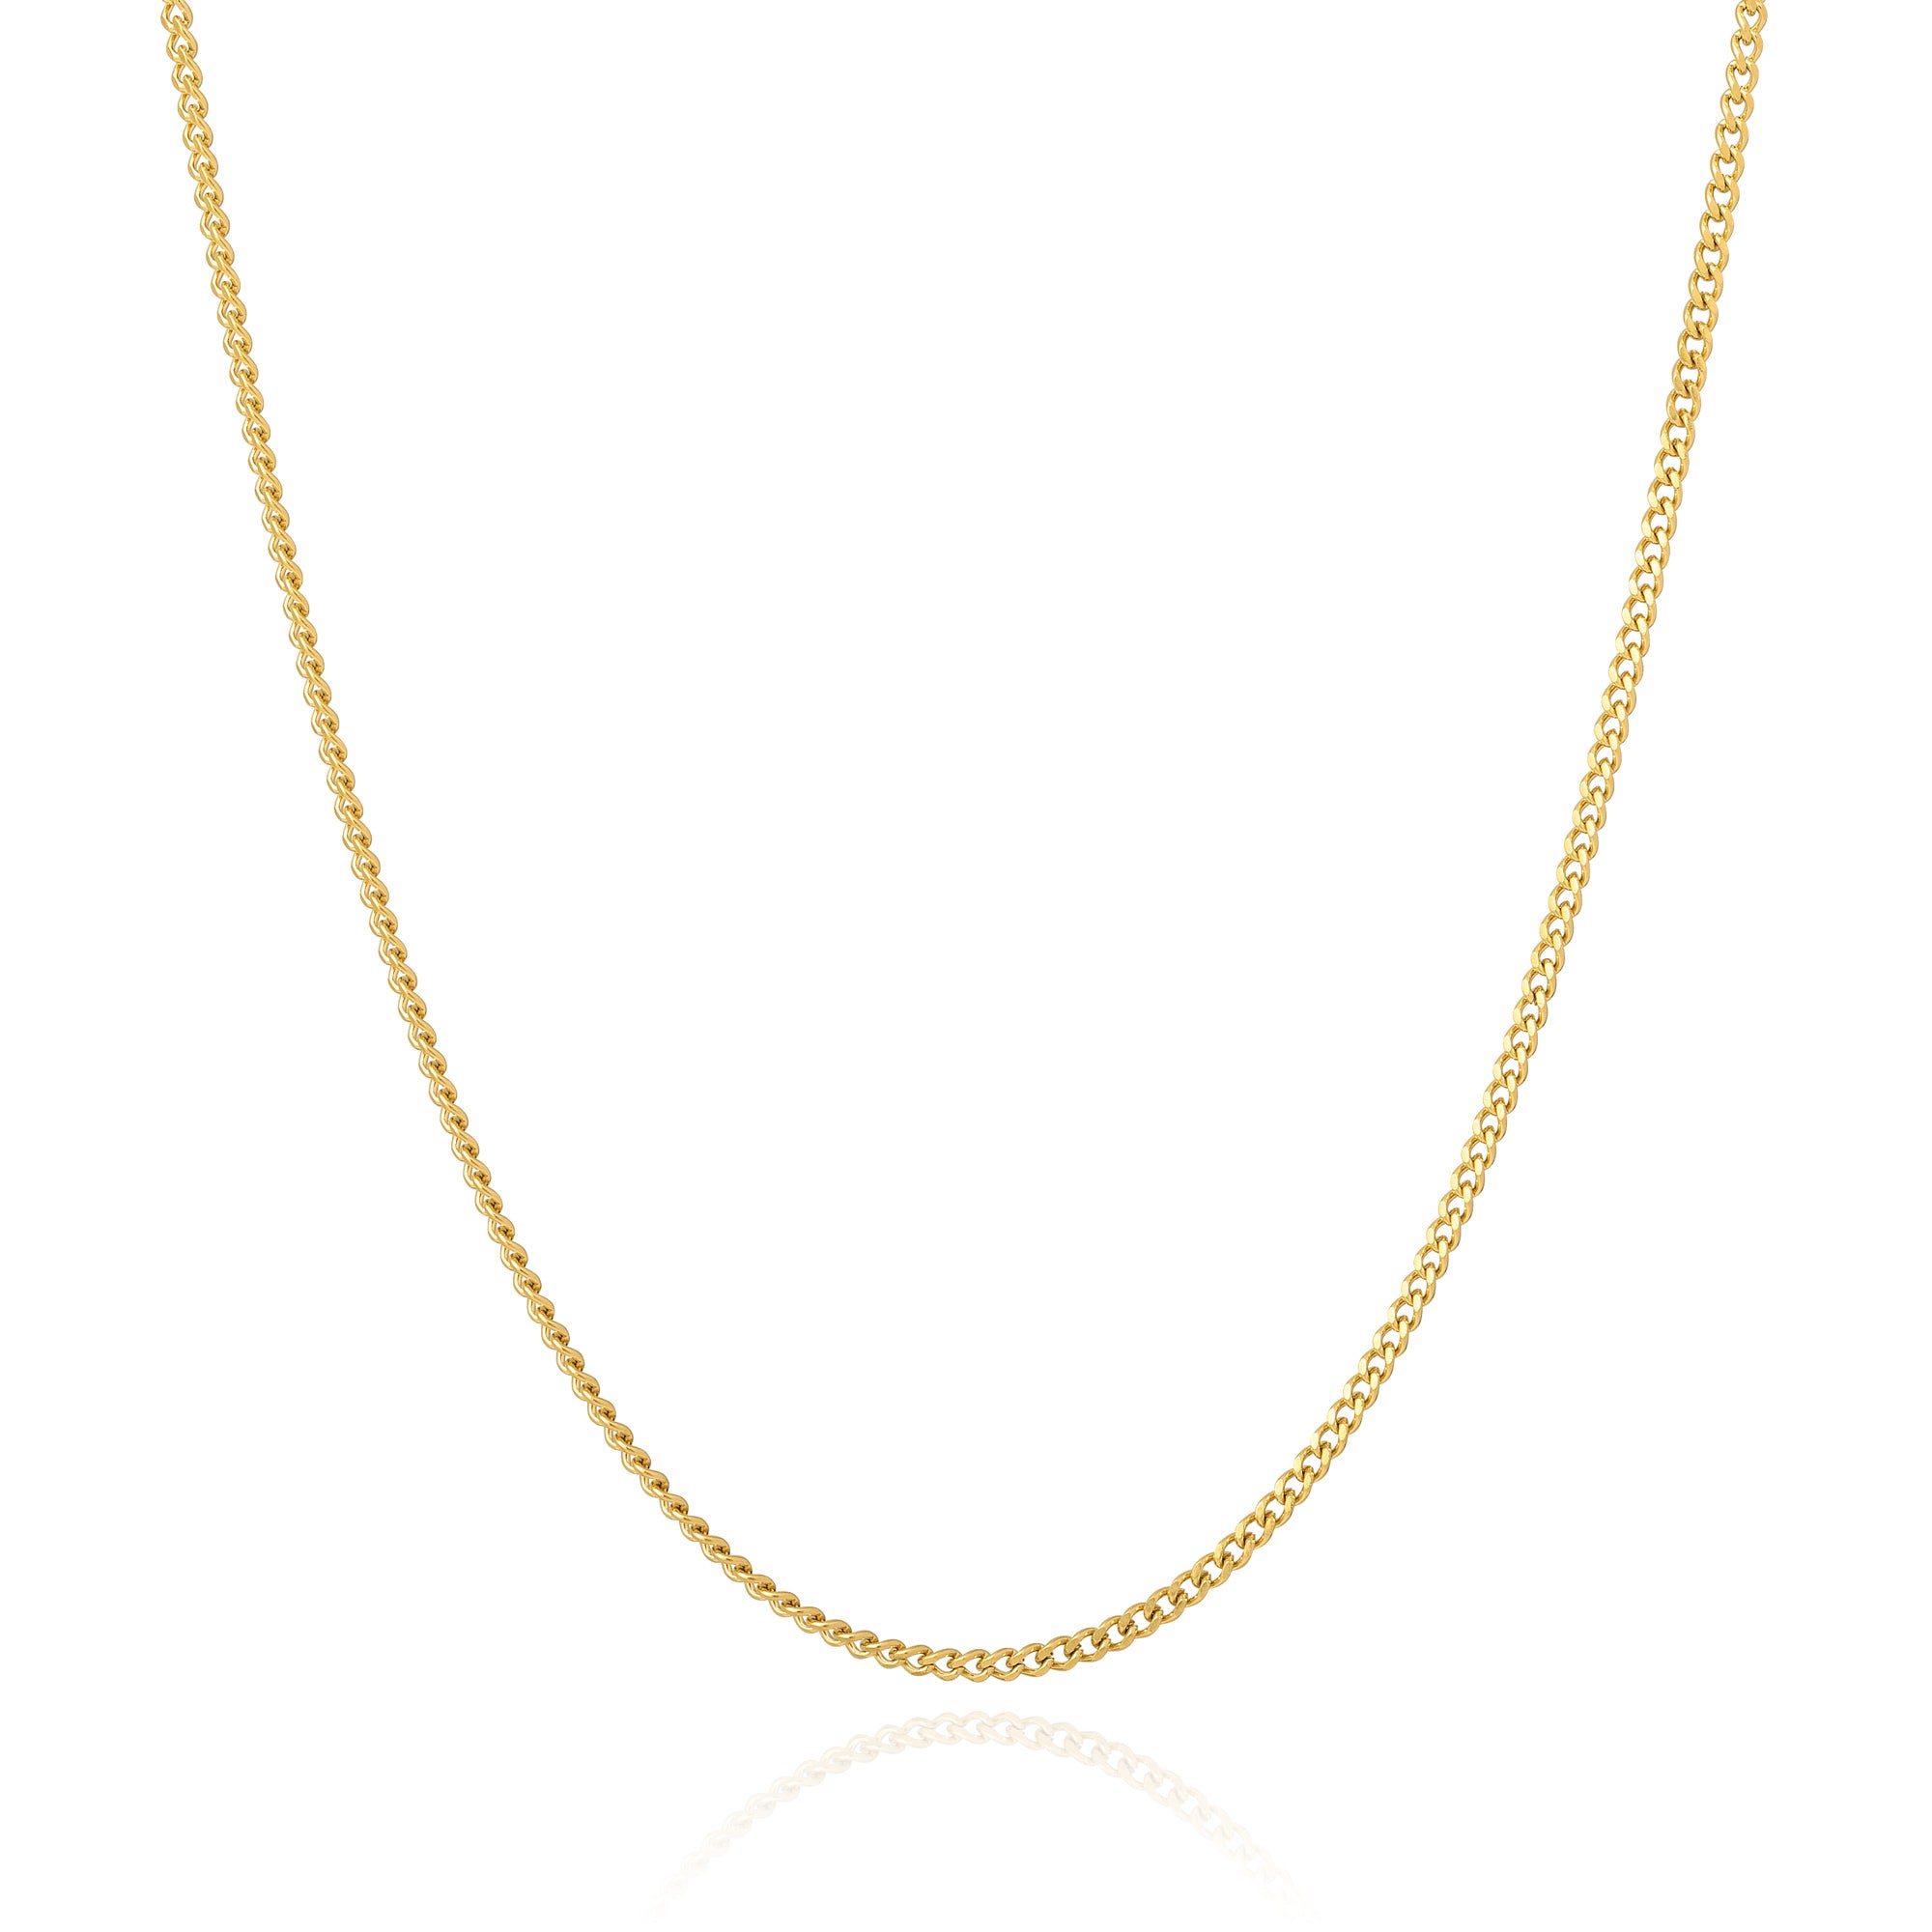 Thin gold cuban necklace on white